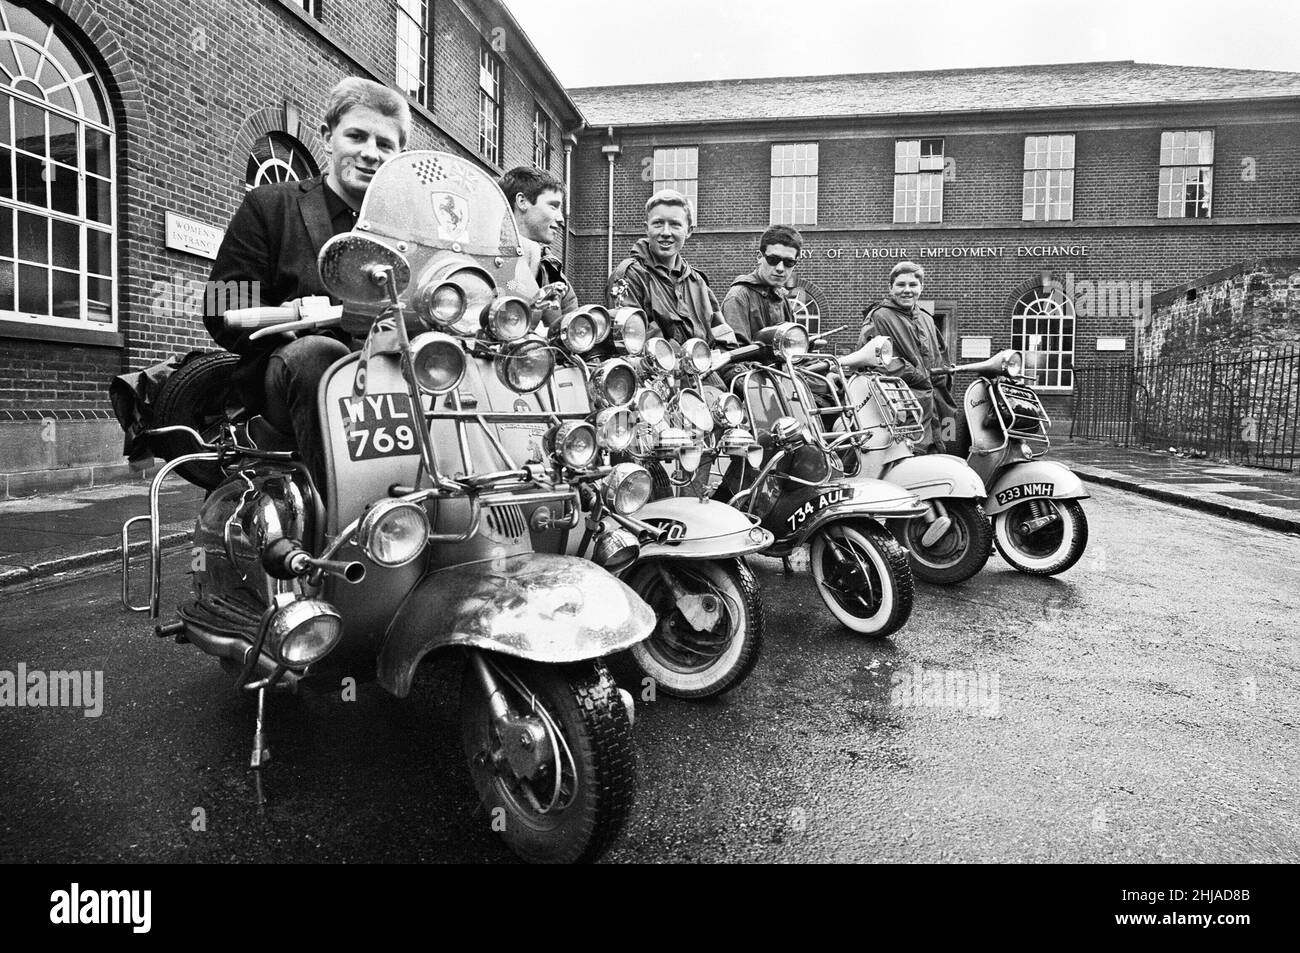 The mods and rockers were two conflicting British youth subcultures of the early to mid-1960s. Media coverage of mods and rockers fighting in 1964 sparked a moral panic about British youths, and the two groups became labelled as folk devils.John Rogers on his scooter with friends in peckham. 6th May 1964. Stock Photo